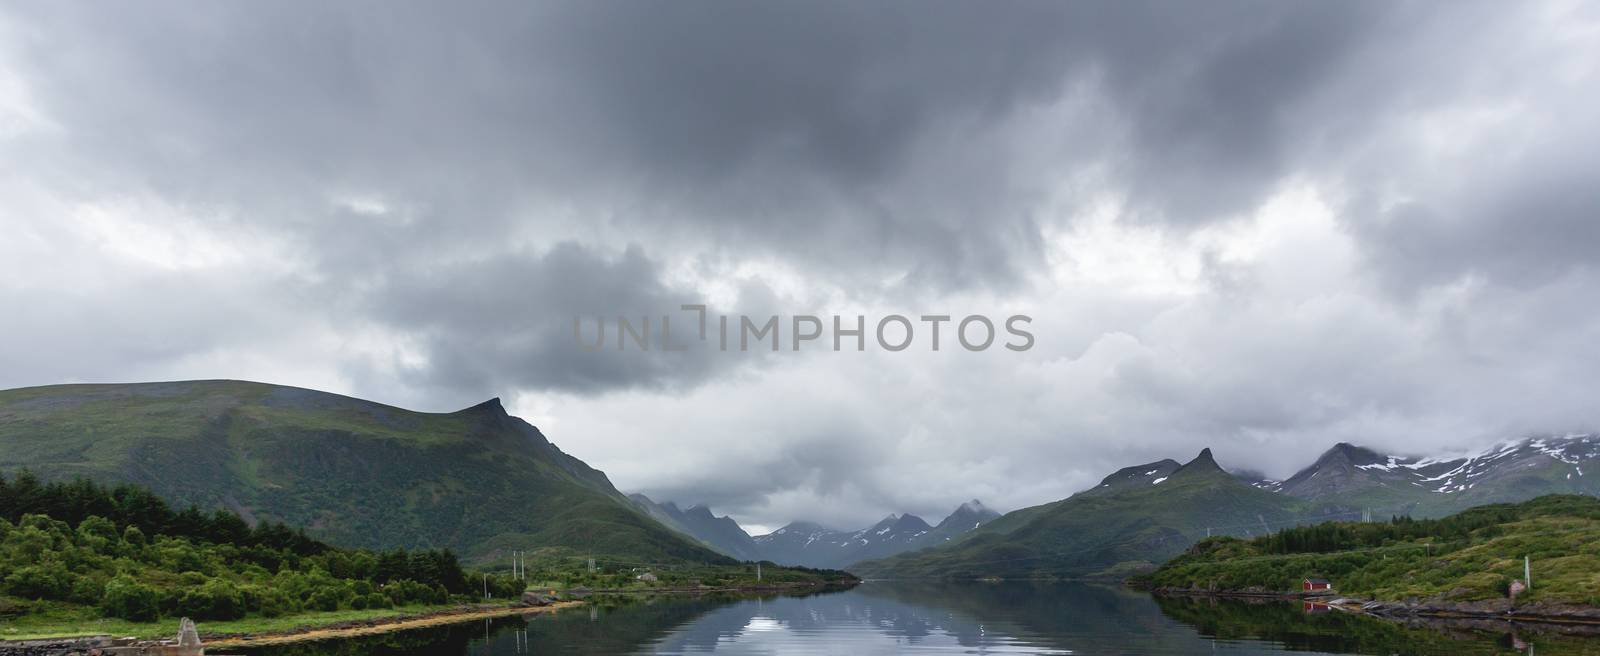 Beautiful scandinavian landscape with fjord, mountains and stormy sky. Lofoten islands, Norway.